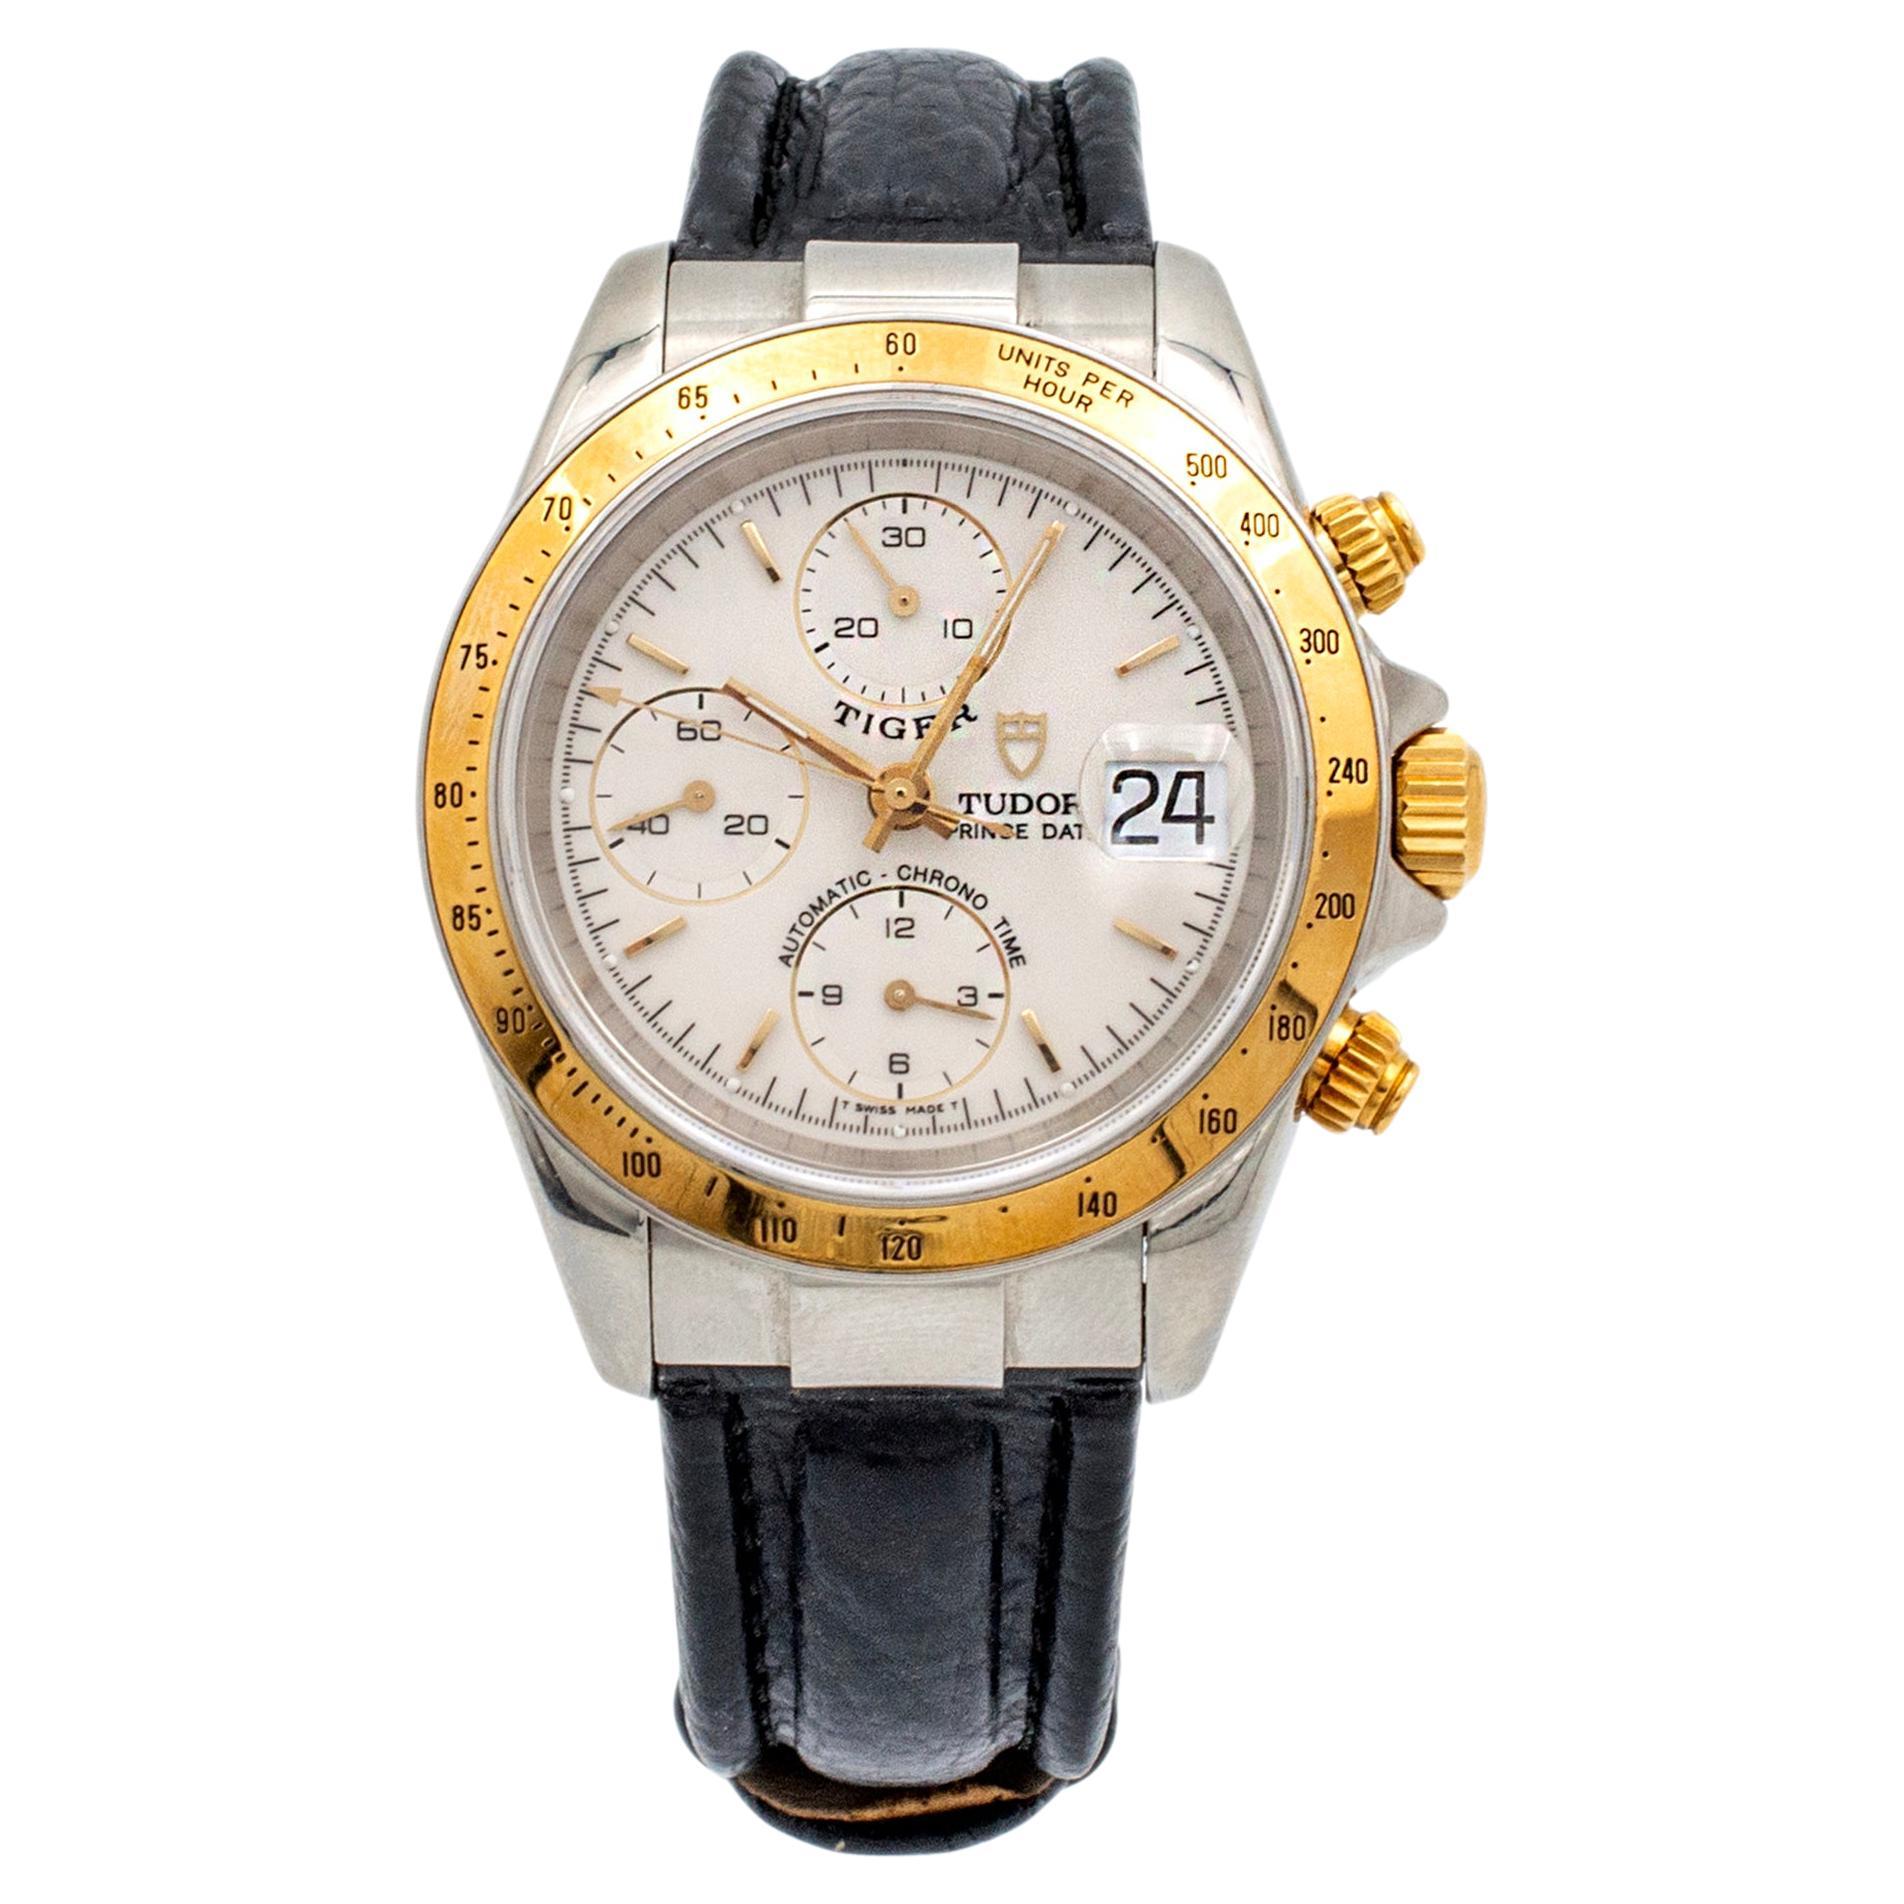 Tudor Prince Date Tiger Woods 79263 Stainless Steel 18K Yellow Gold Men’s Watch For Sale